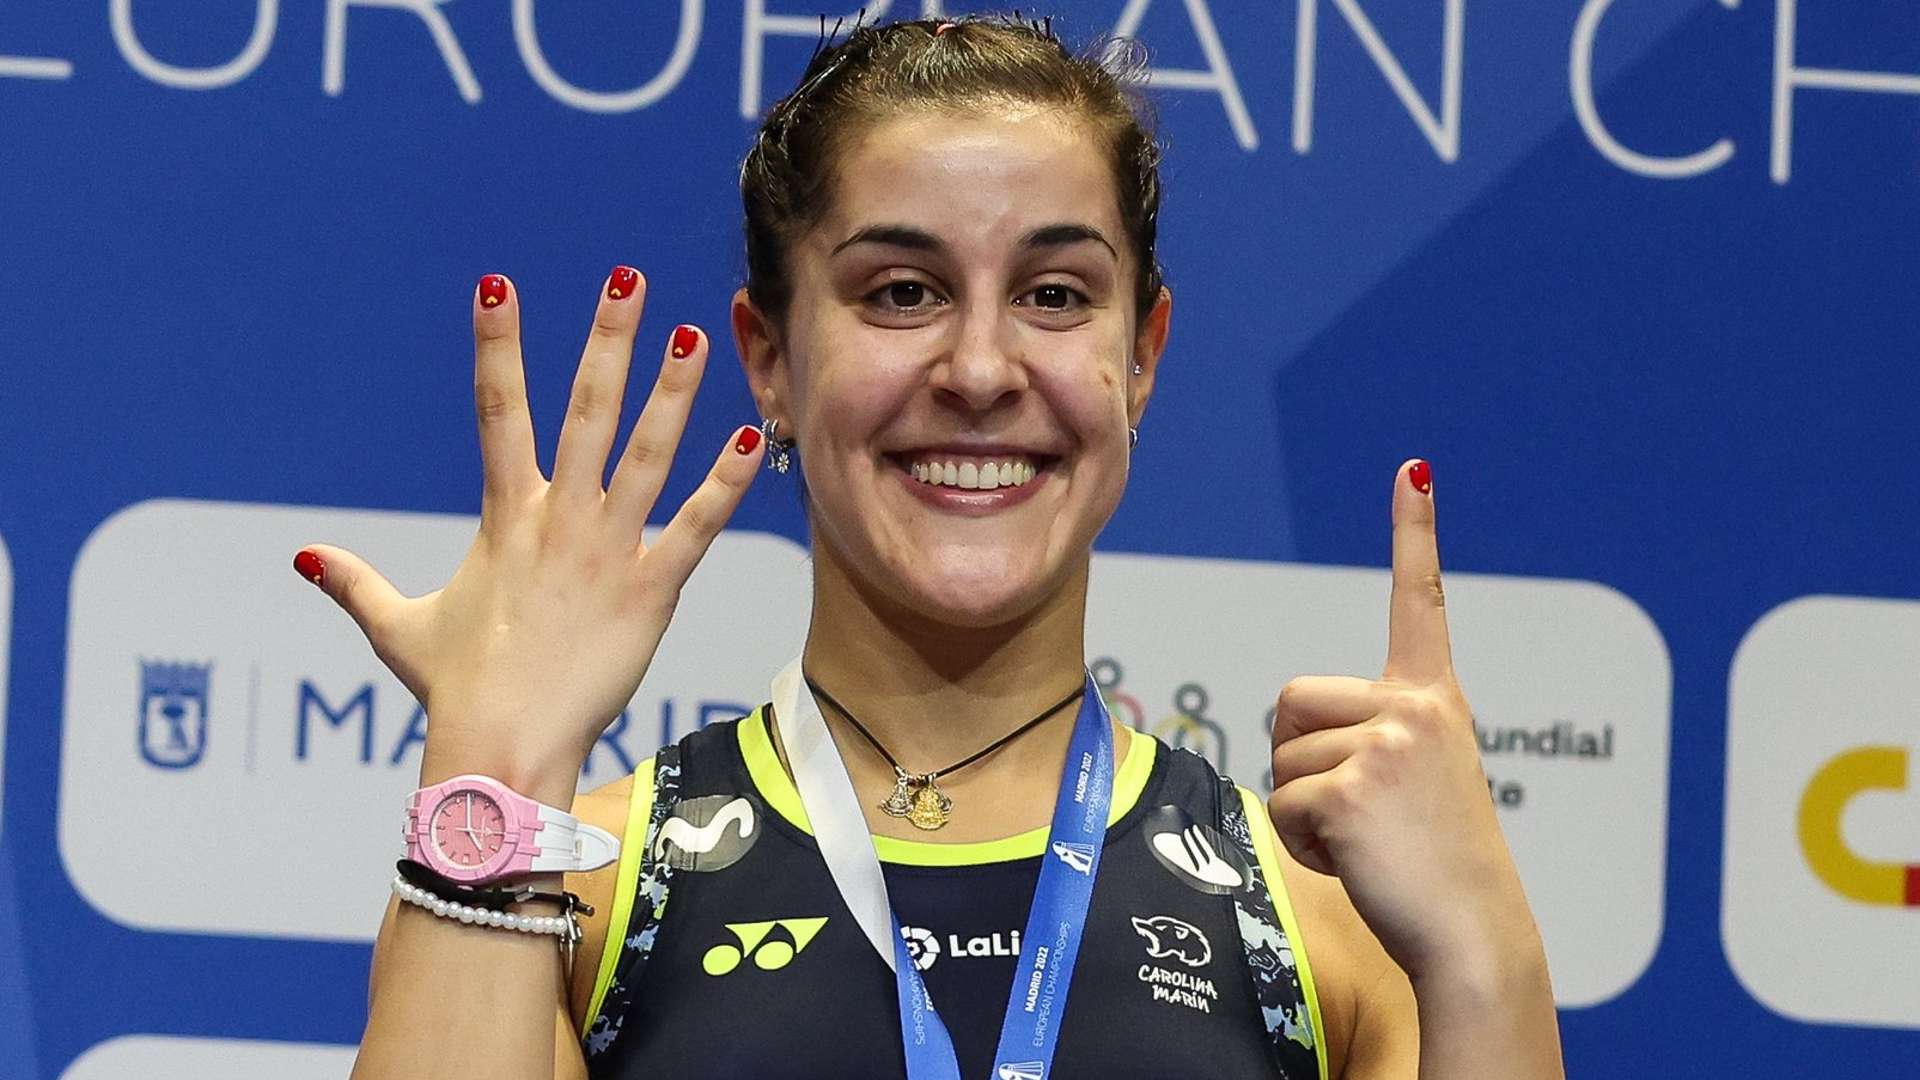 Carolina Marin after becoming the European champion in 2022 for the sixth-time (Image Credits - Twitter)